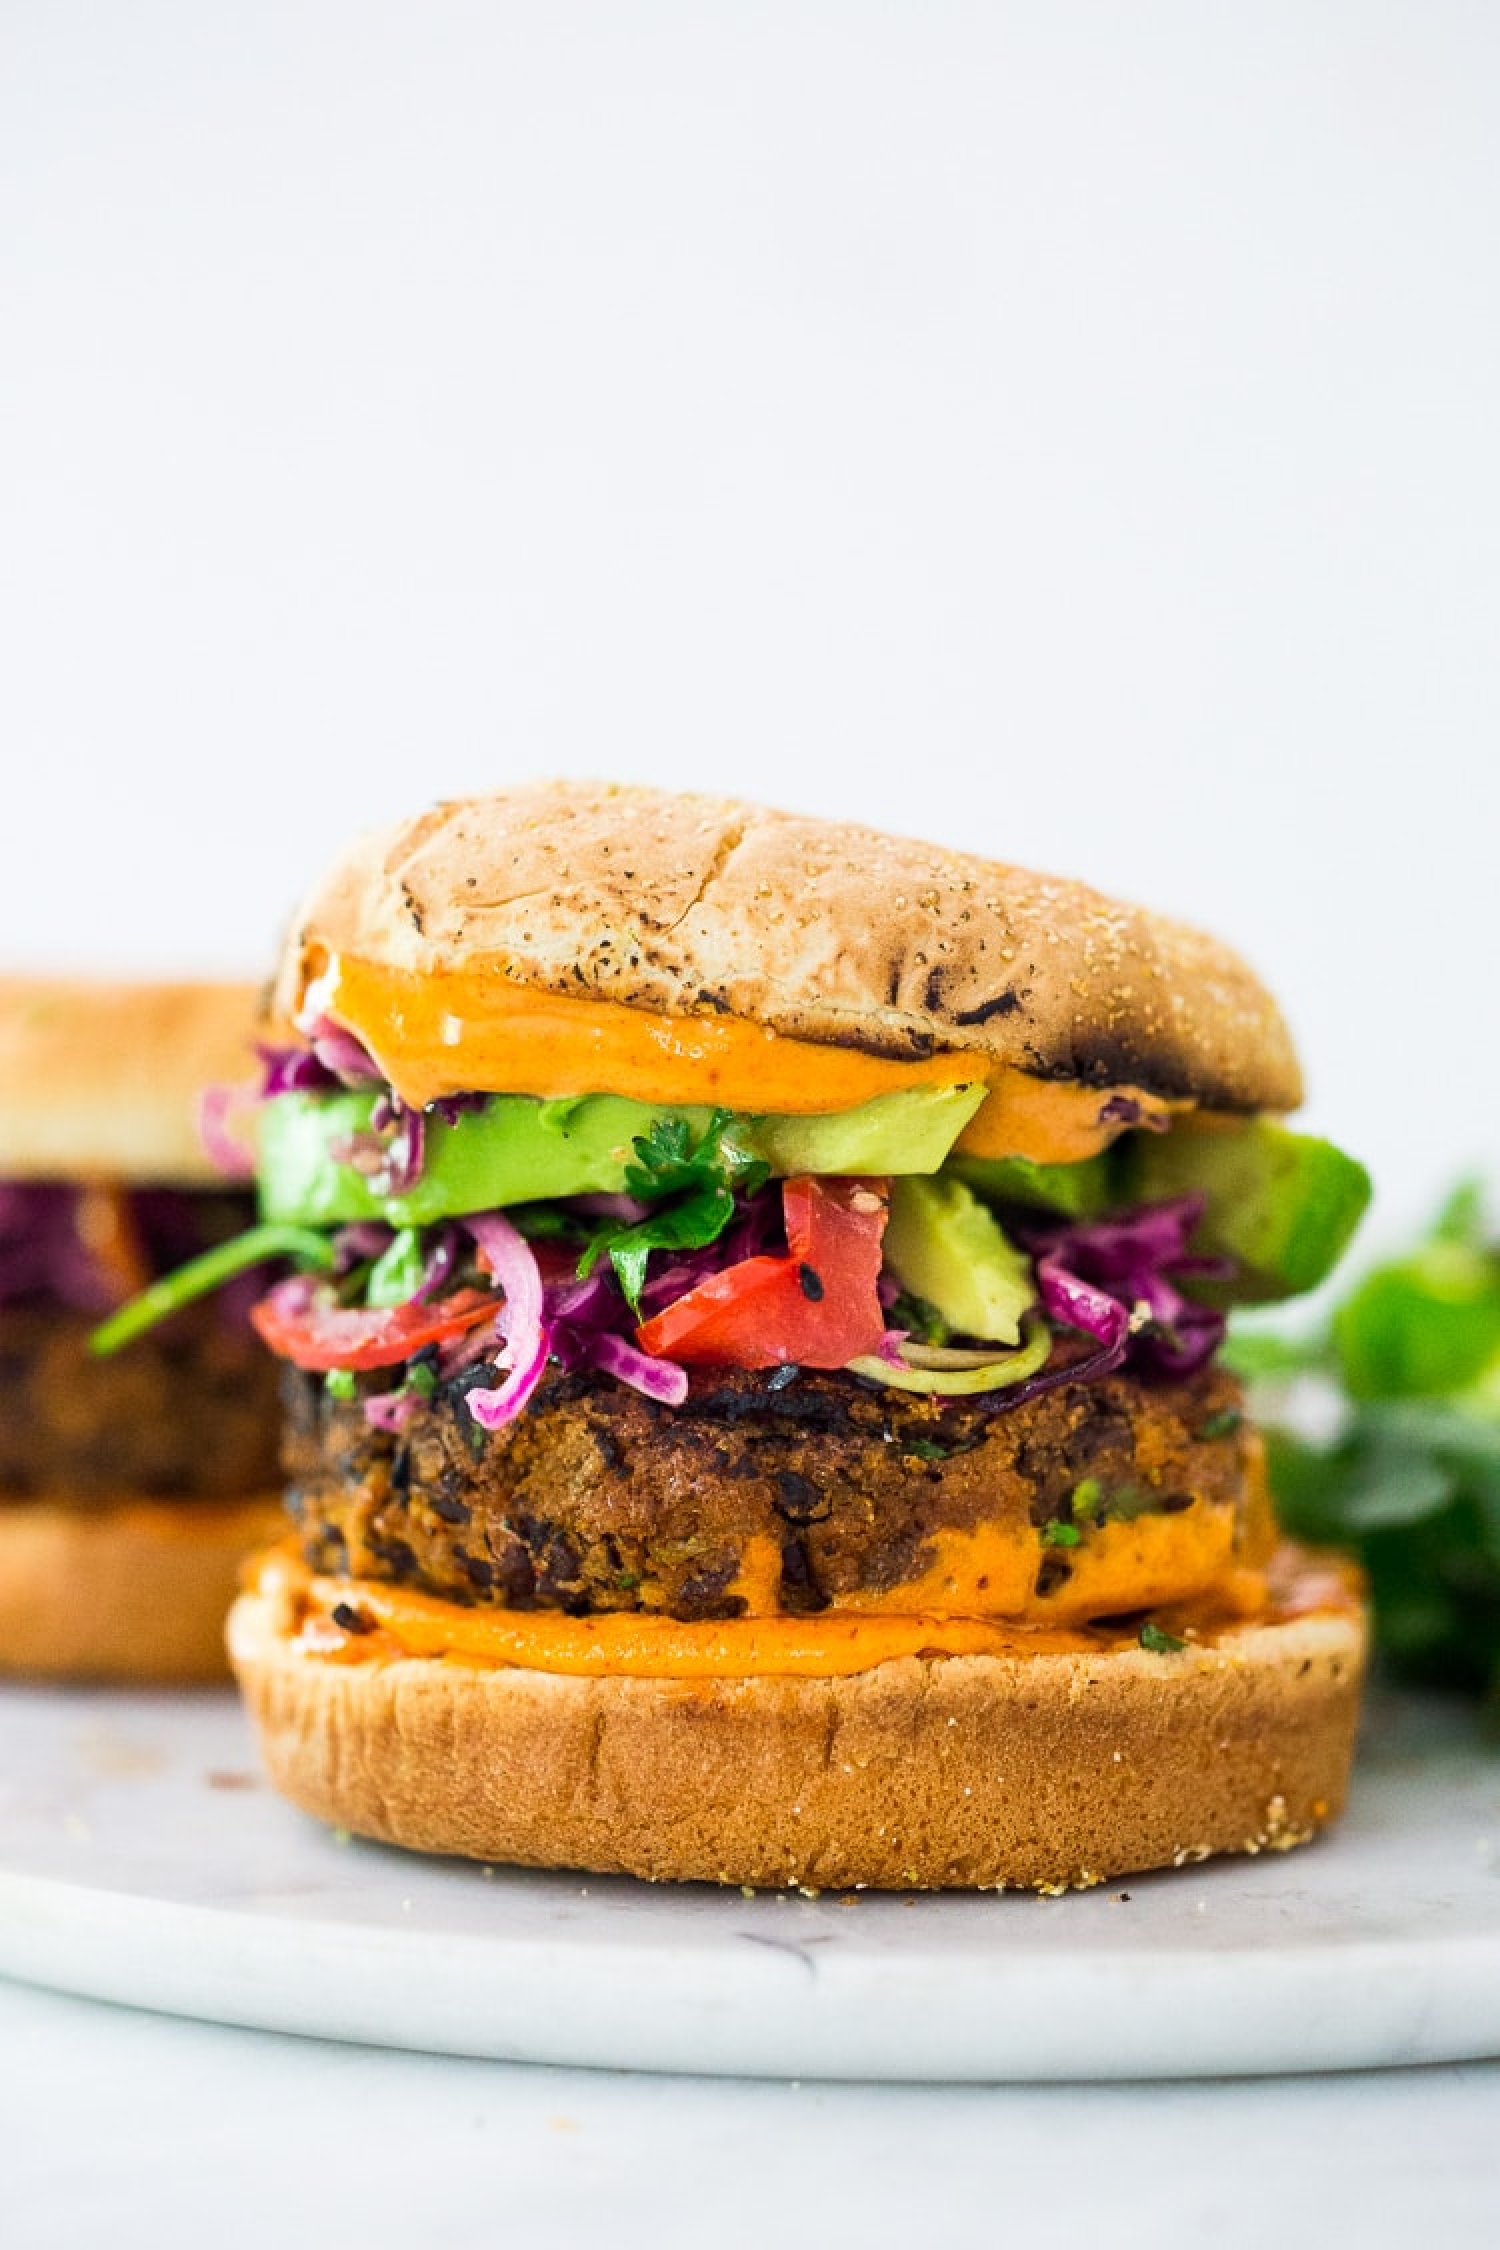 <p>These black bean burgers are made with zesty Mexican seasonings, and some of the ingredients are slightly cooked beforehand to infuse them with maximum flavor. Ready in less than 40 minutes, they'll definitely become a meatless meal fave! <a href="https://www.feastingathome.com/black-bean-burger-recipe/" rel="noopener">Get the recipe here.</a></p>